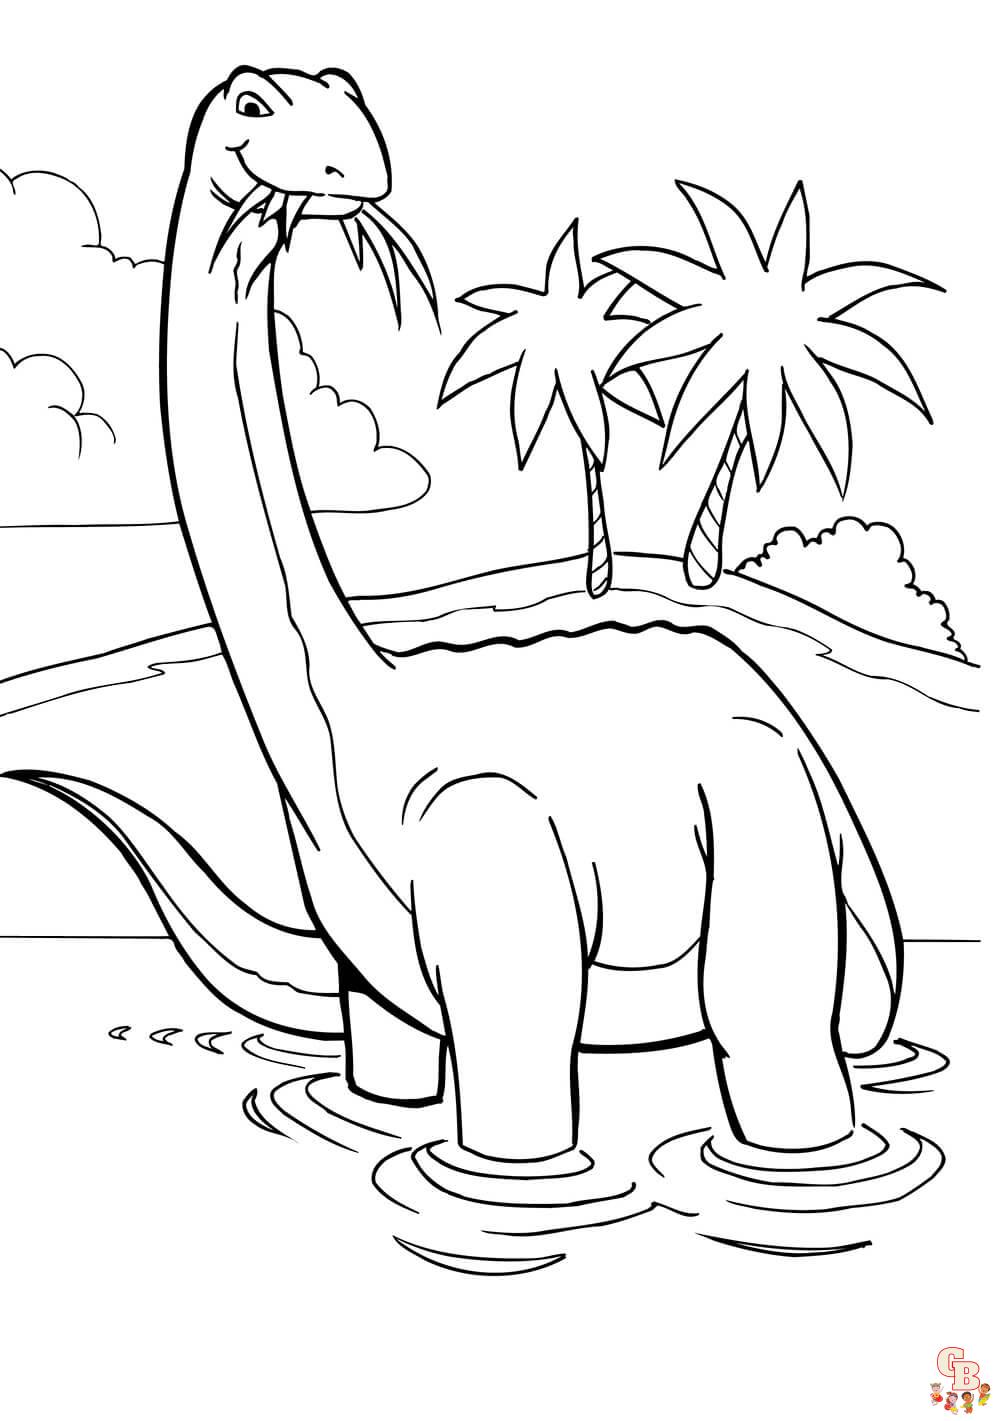 Brontosaurus Coloring Pages 9